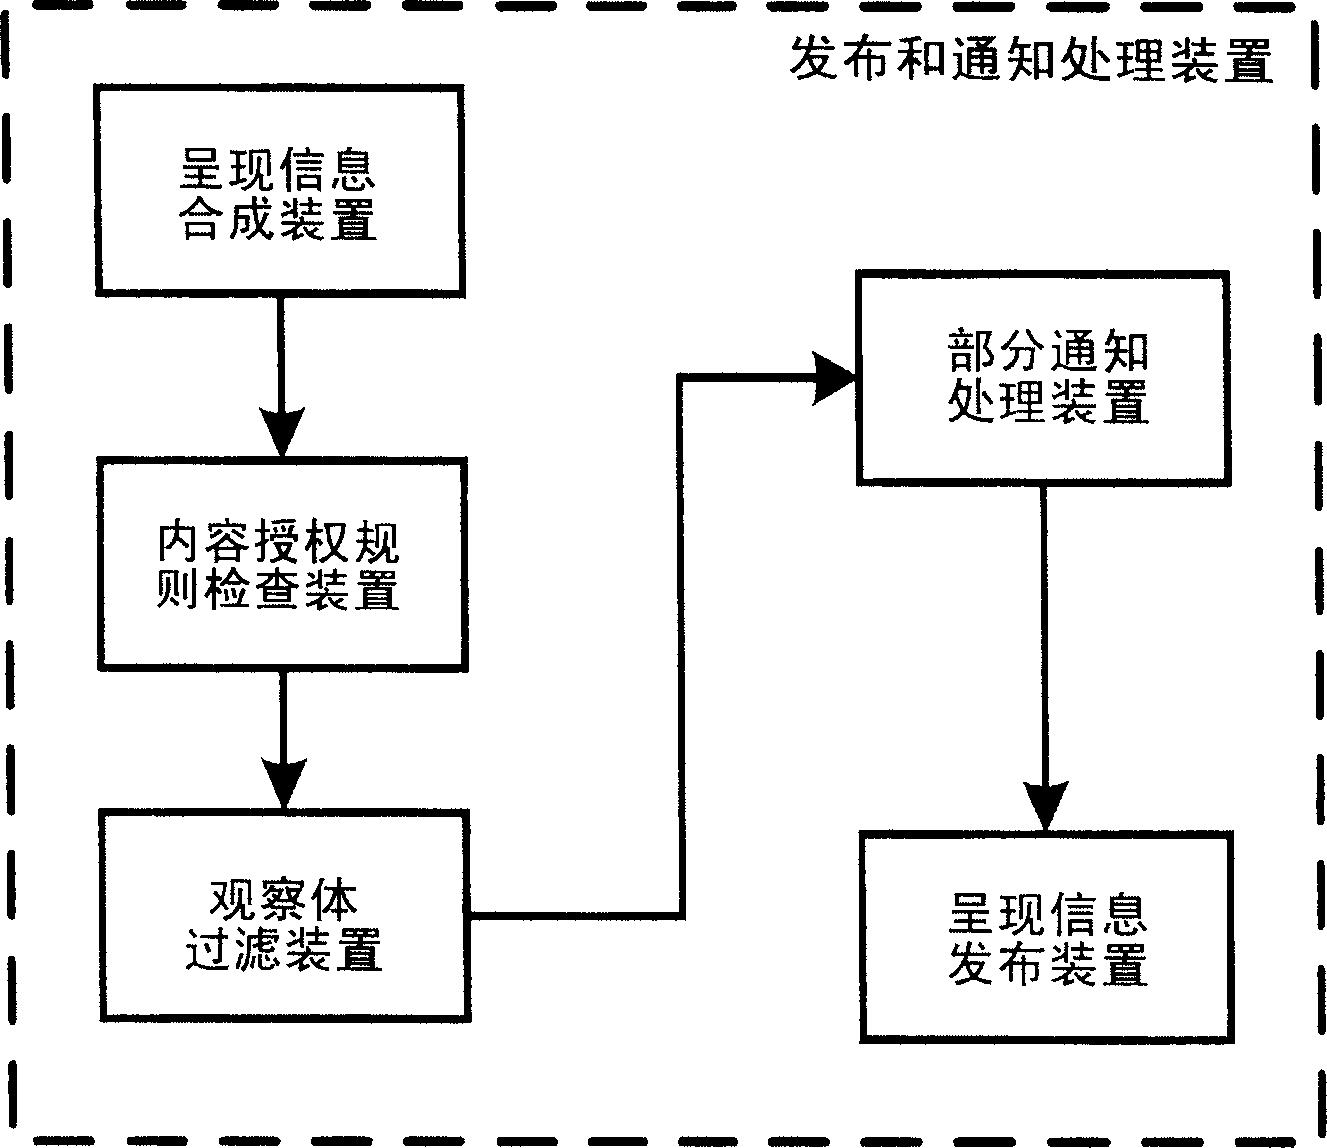 Informing method and system for presenting information